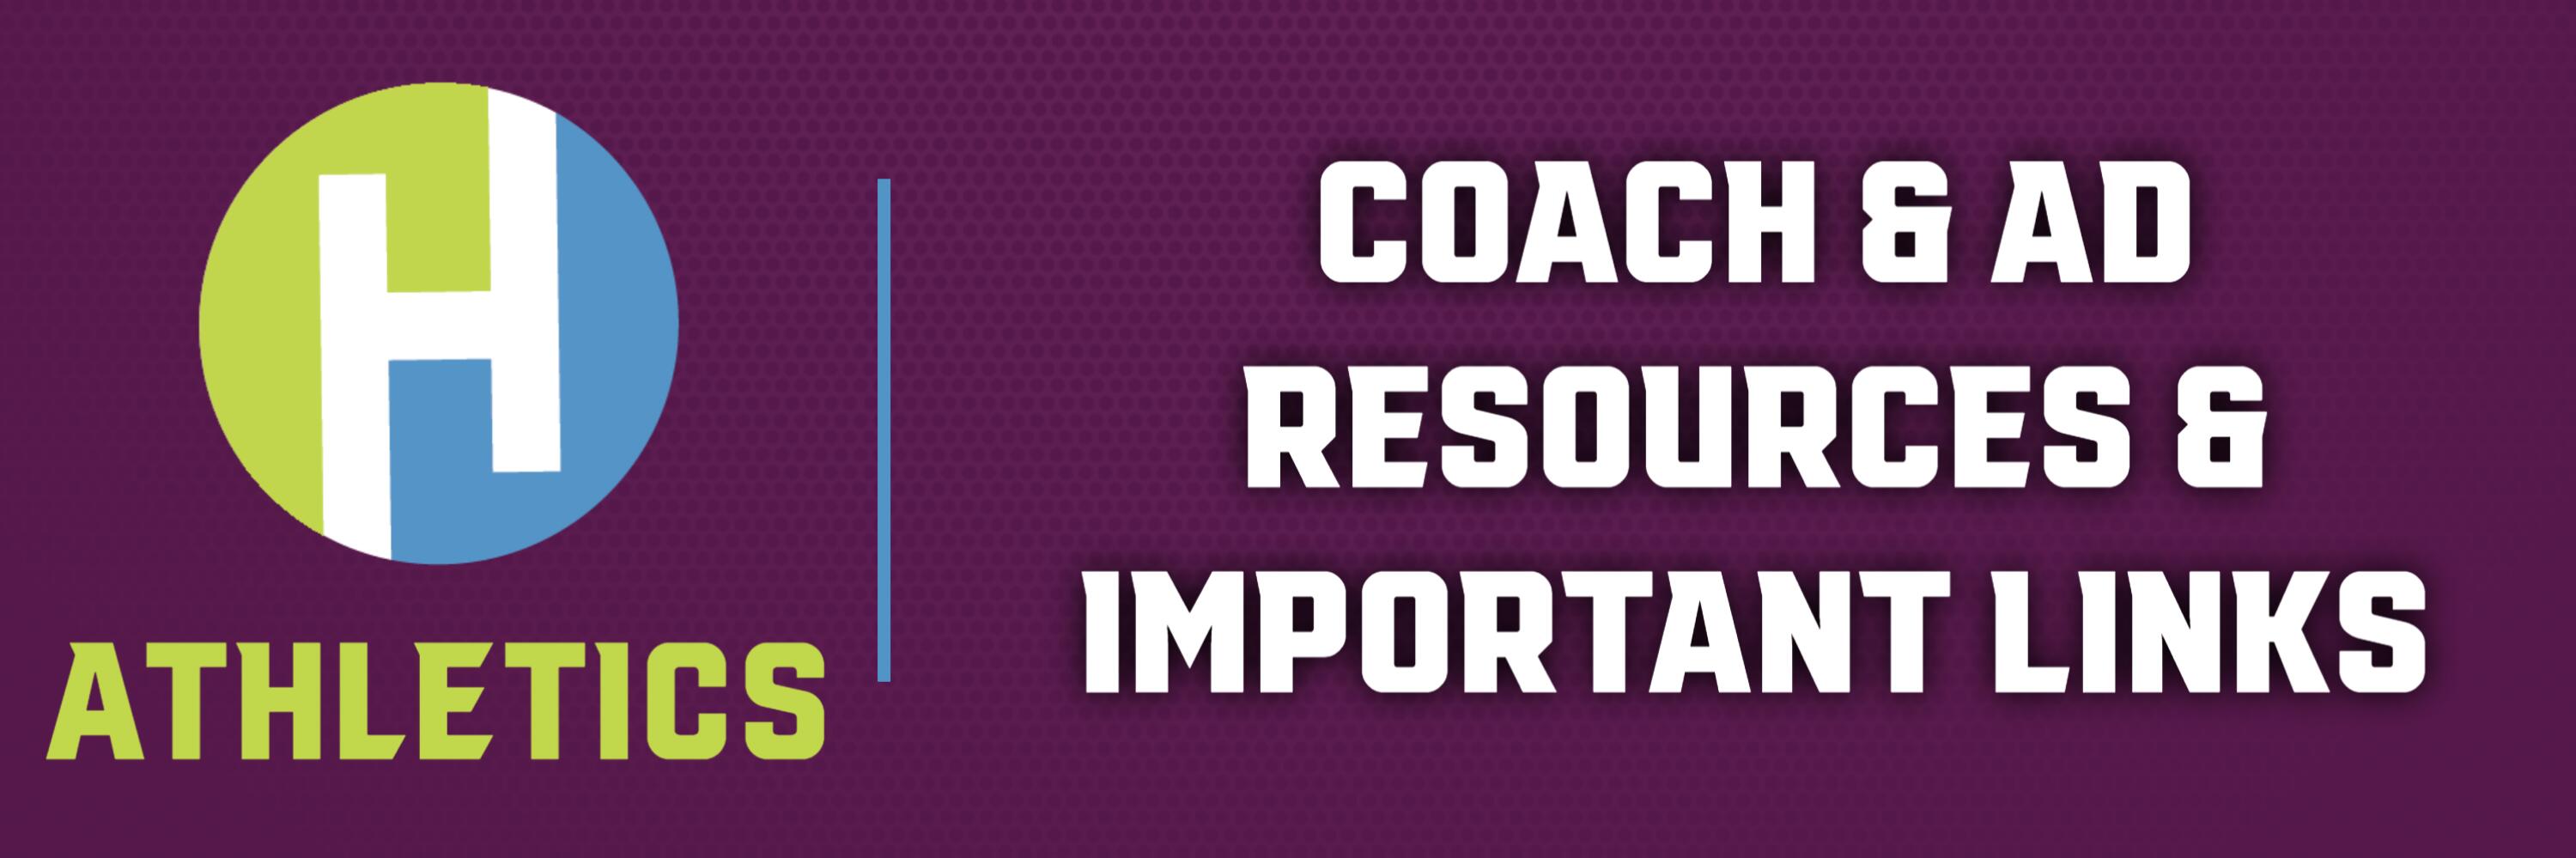 Coach & AD Resources and Important Links